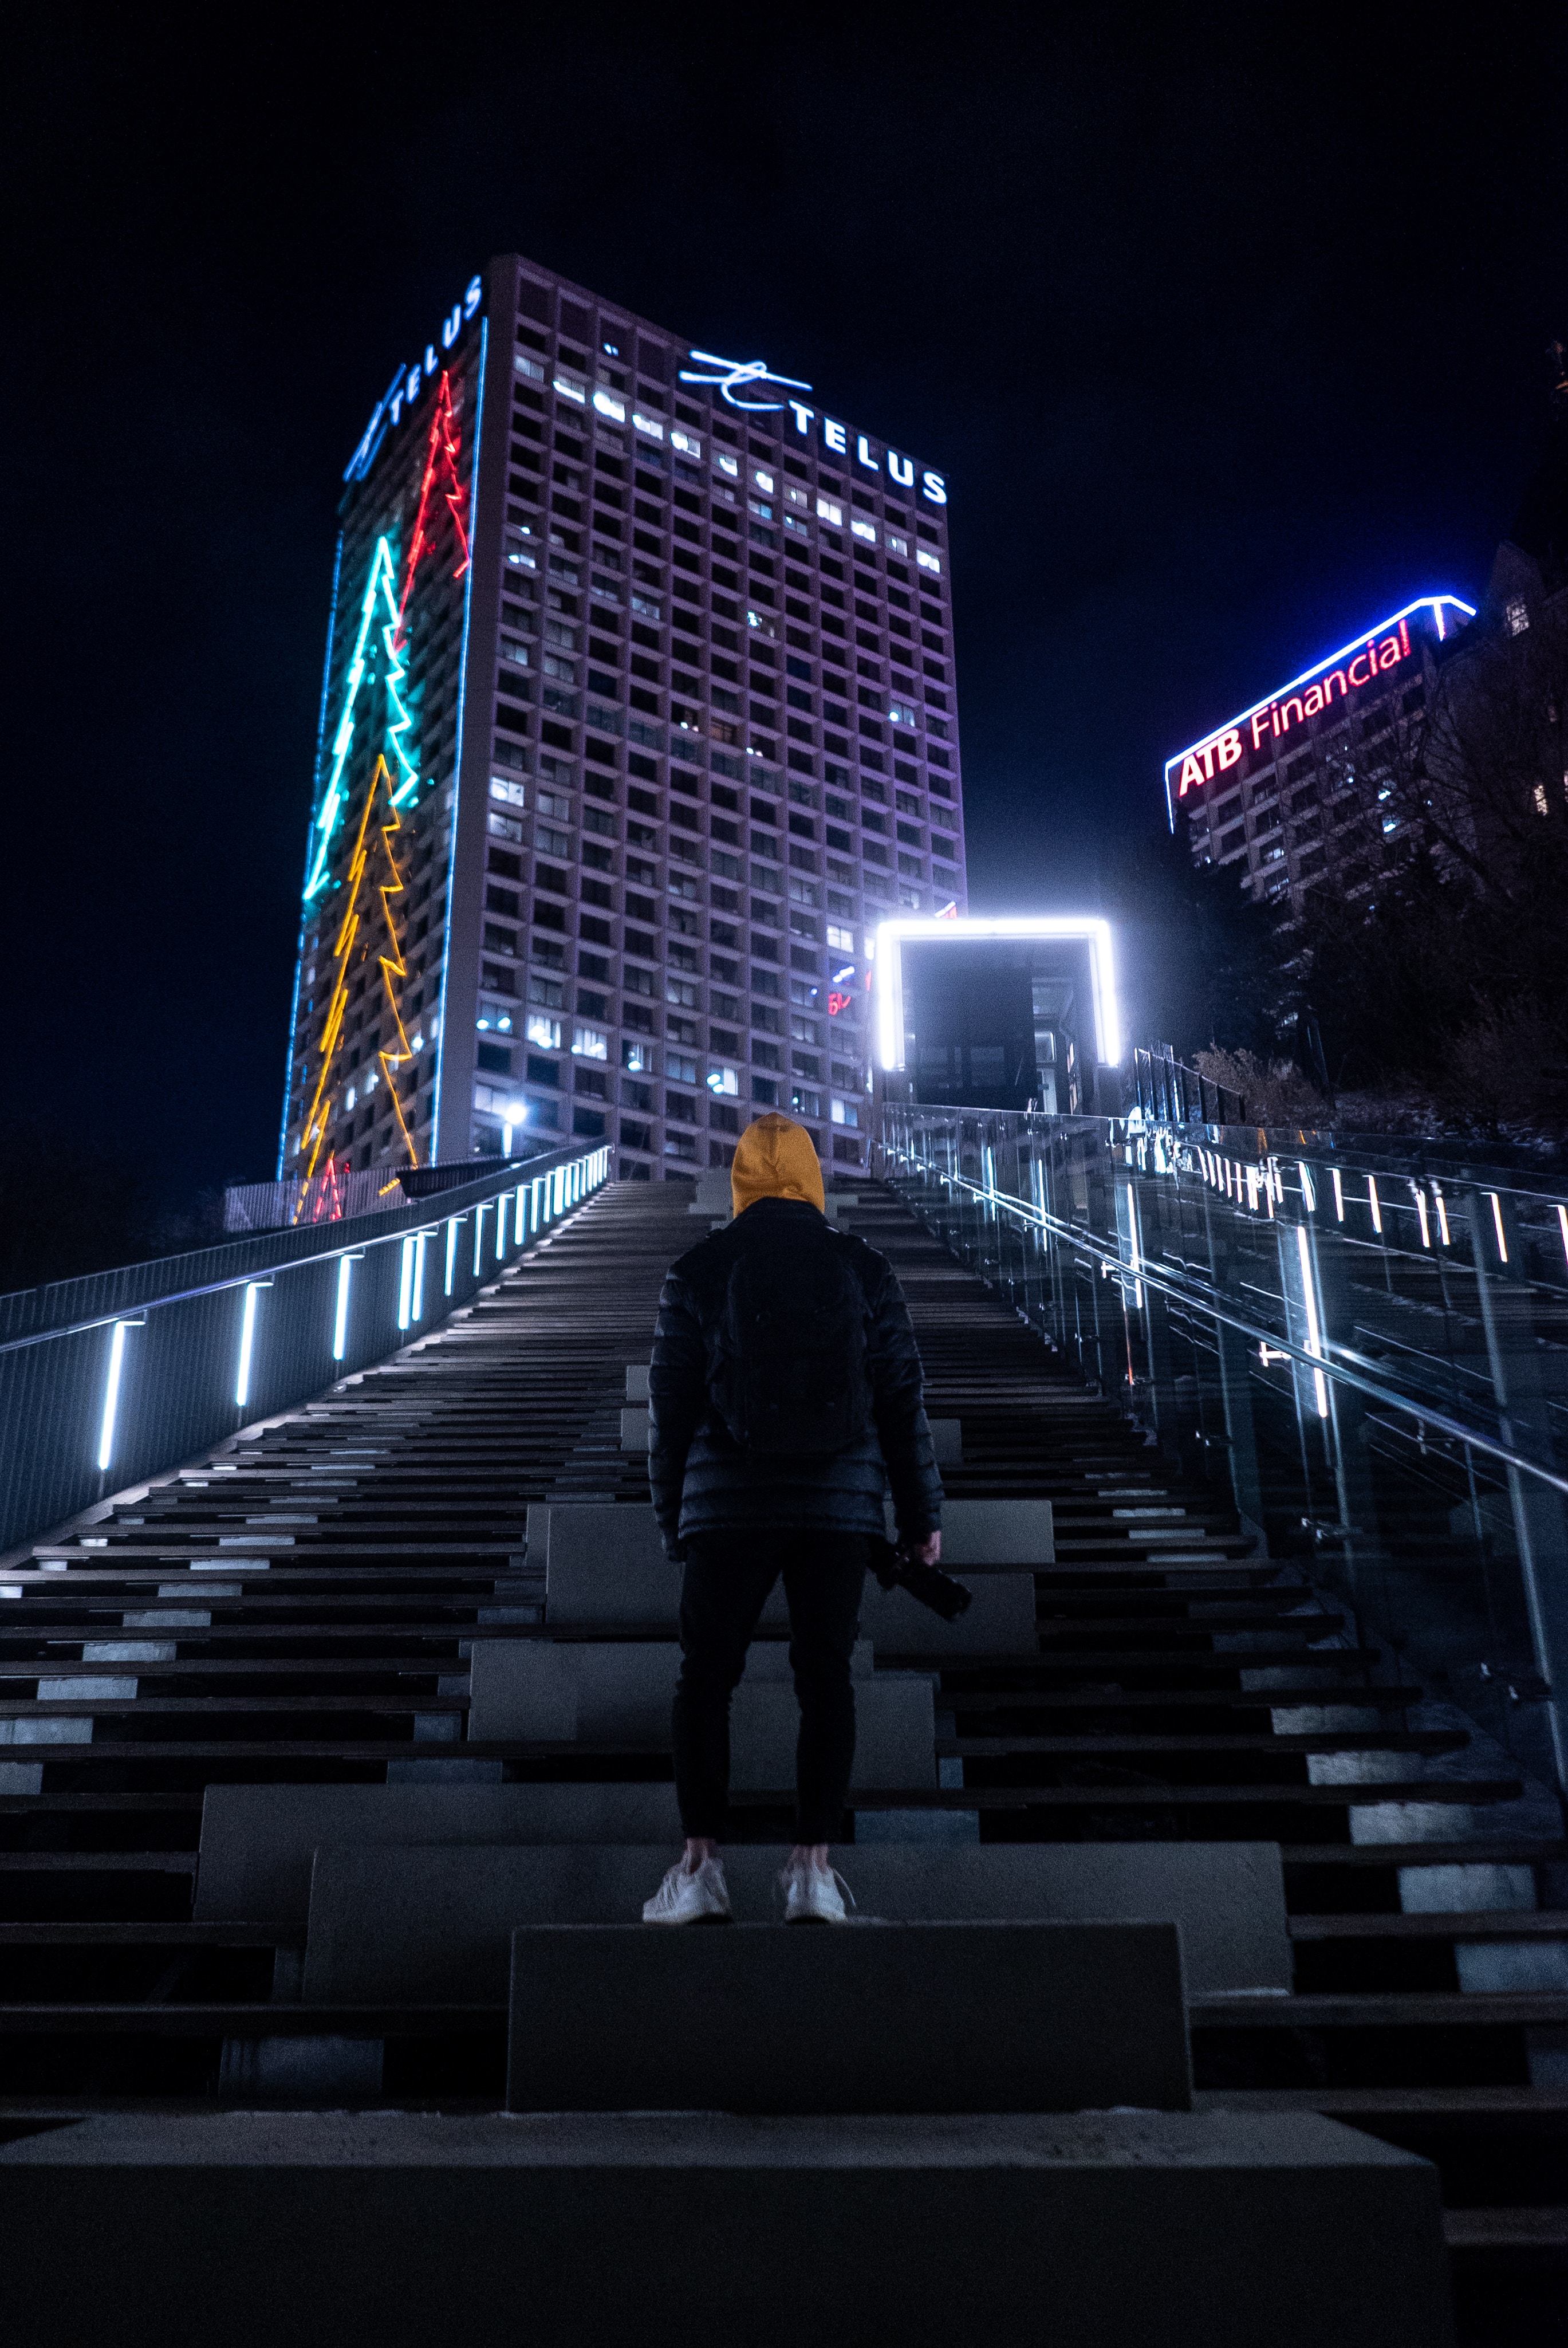 dark, lonely, alone, building, night city, human, person, hood Full HD